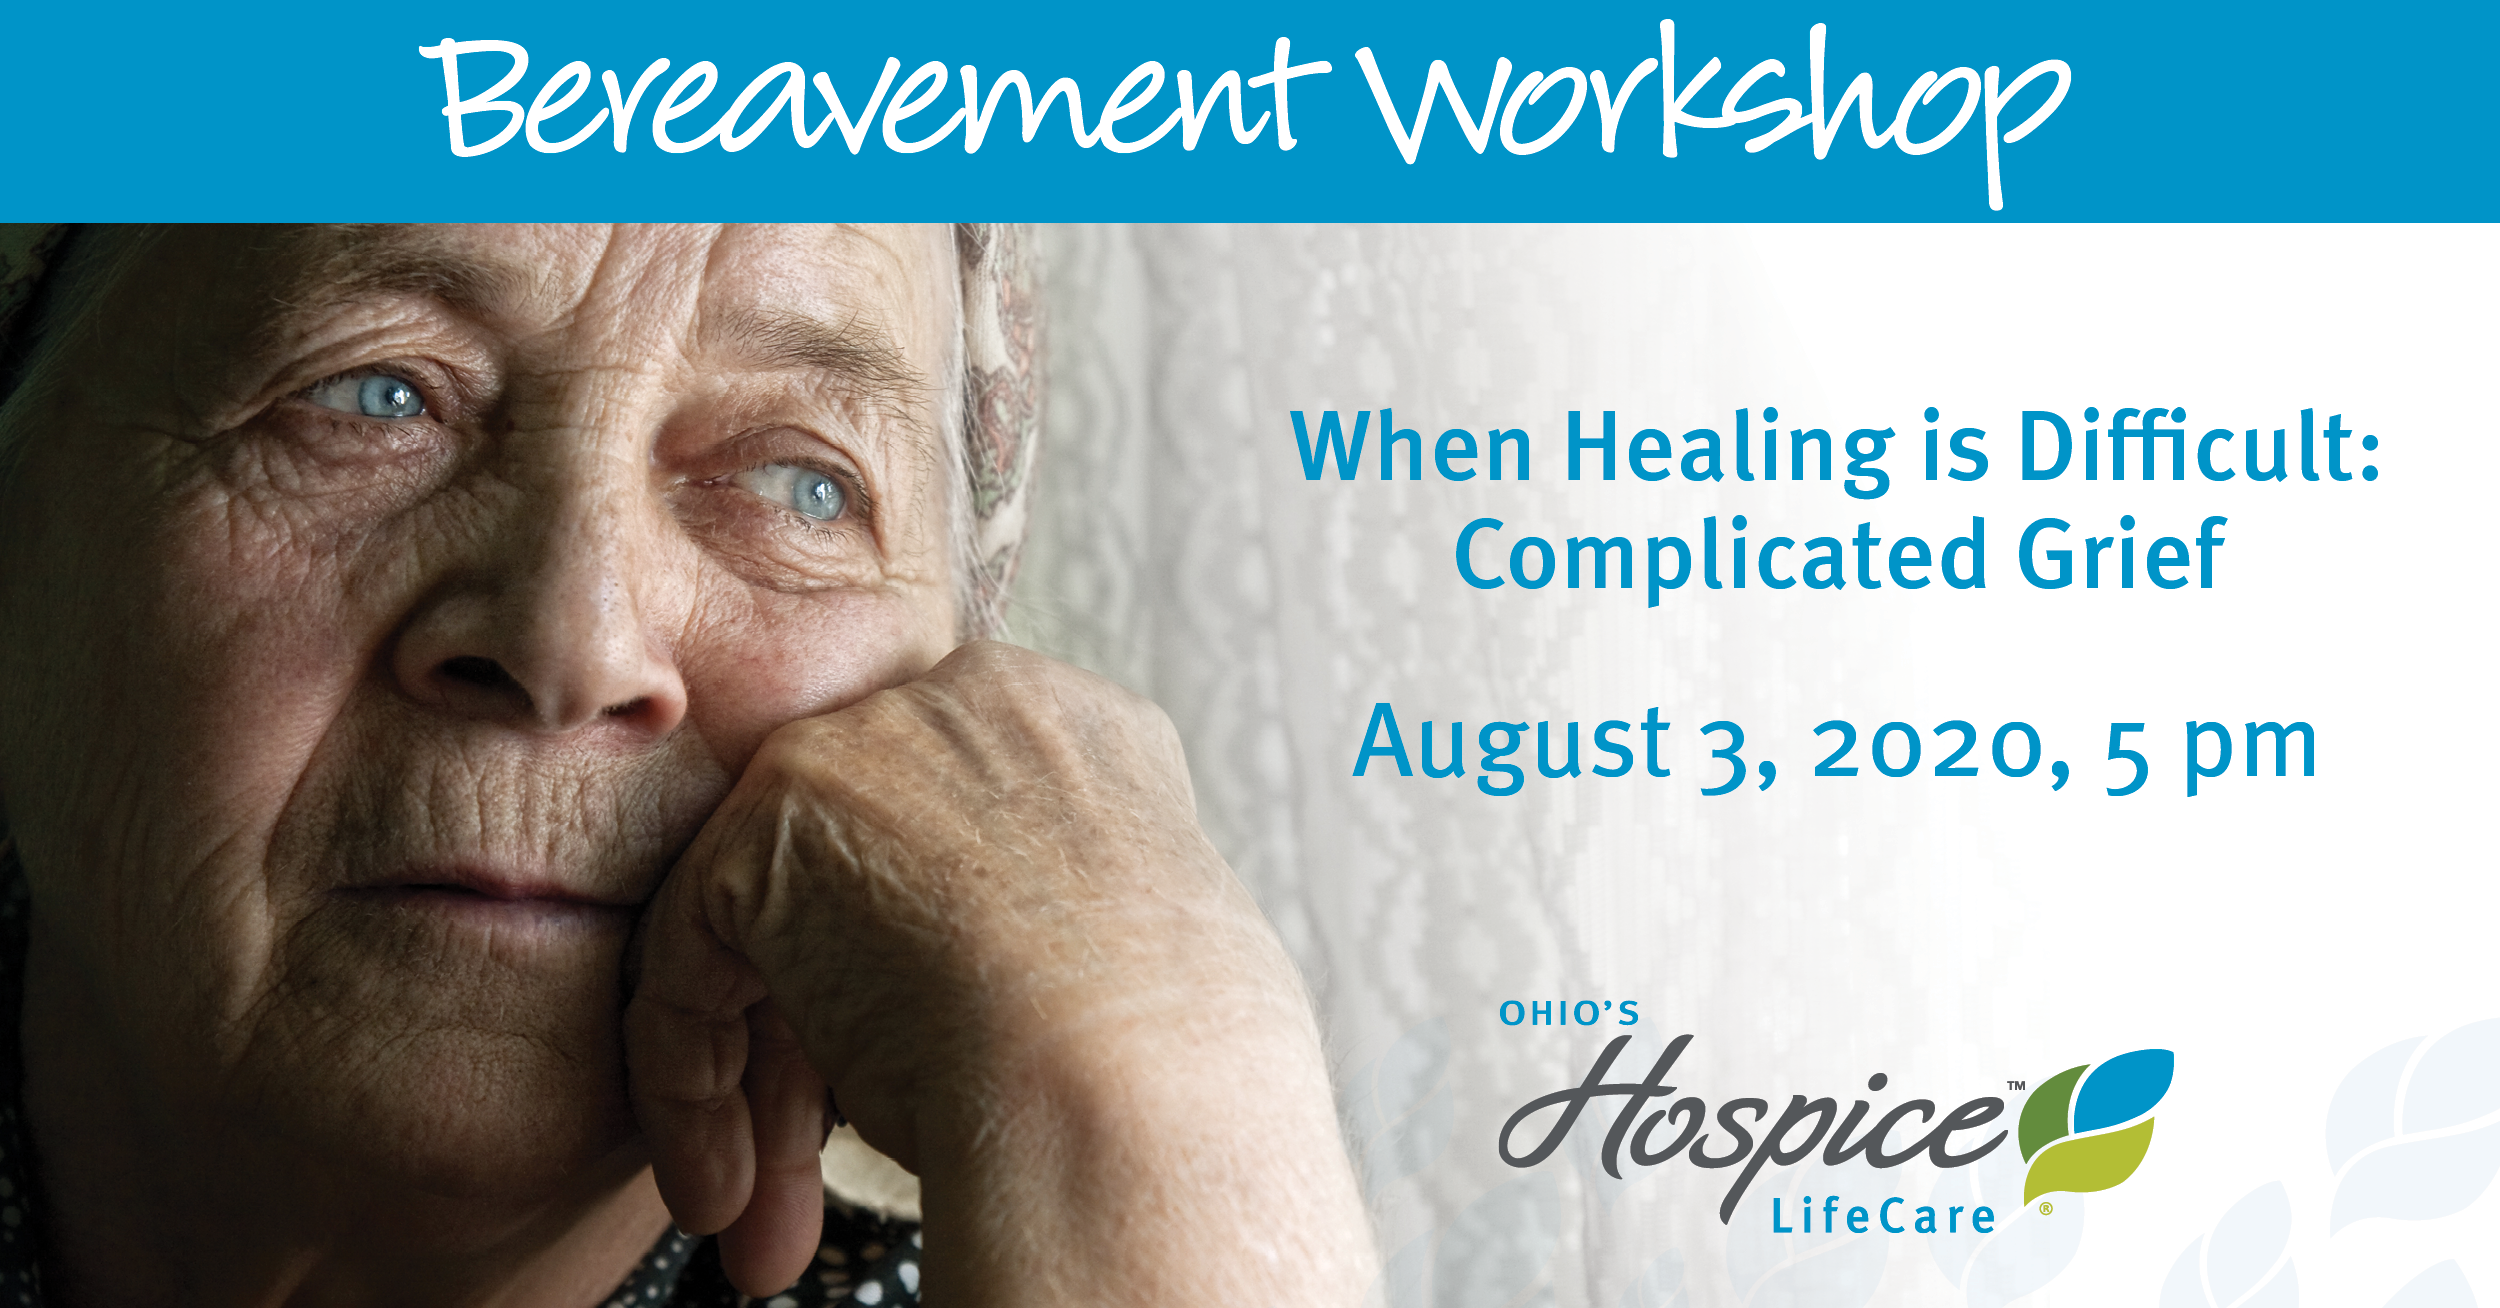 Bereavement Workshop - When Healing is Difficult: Complicated Grief